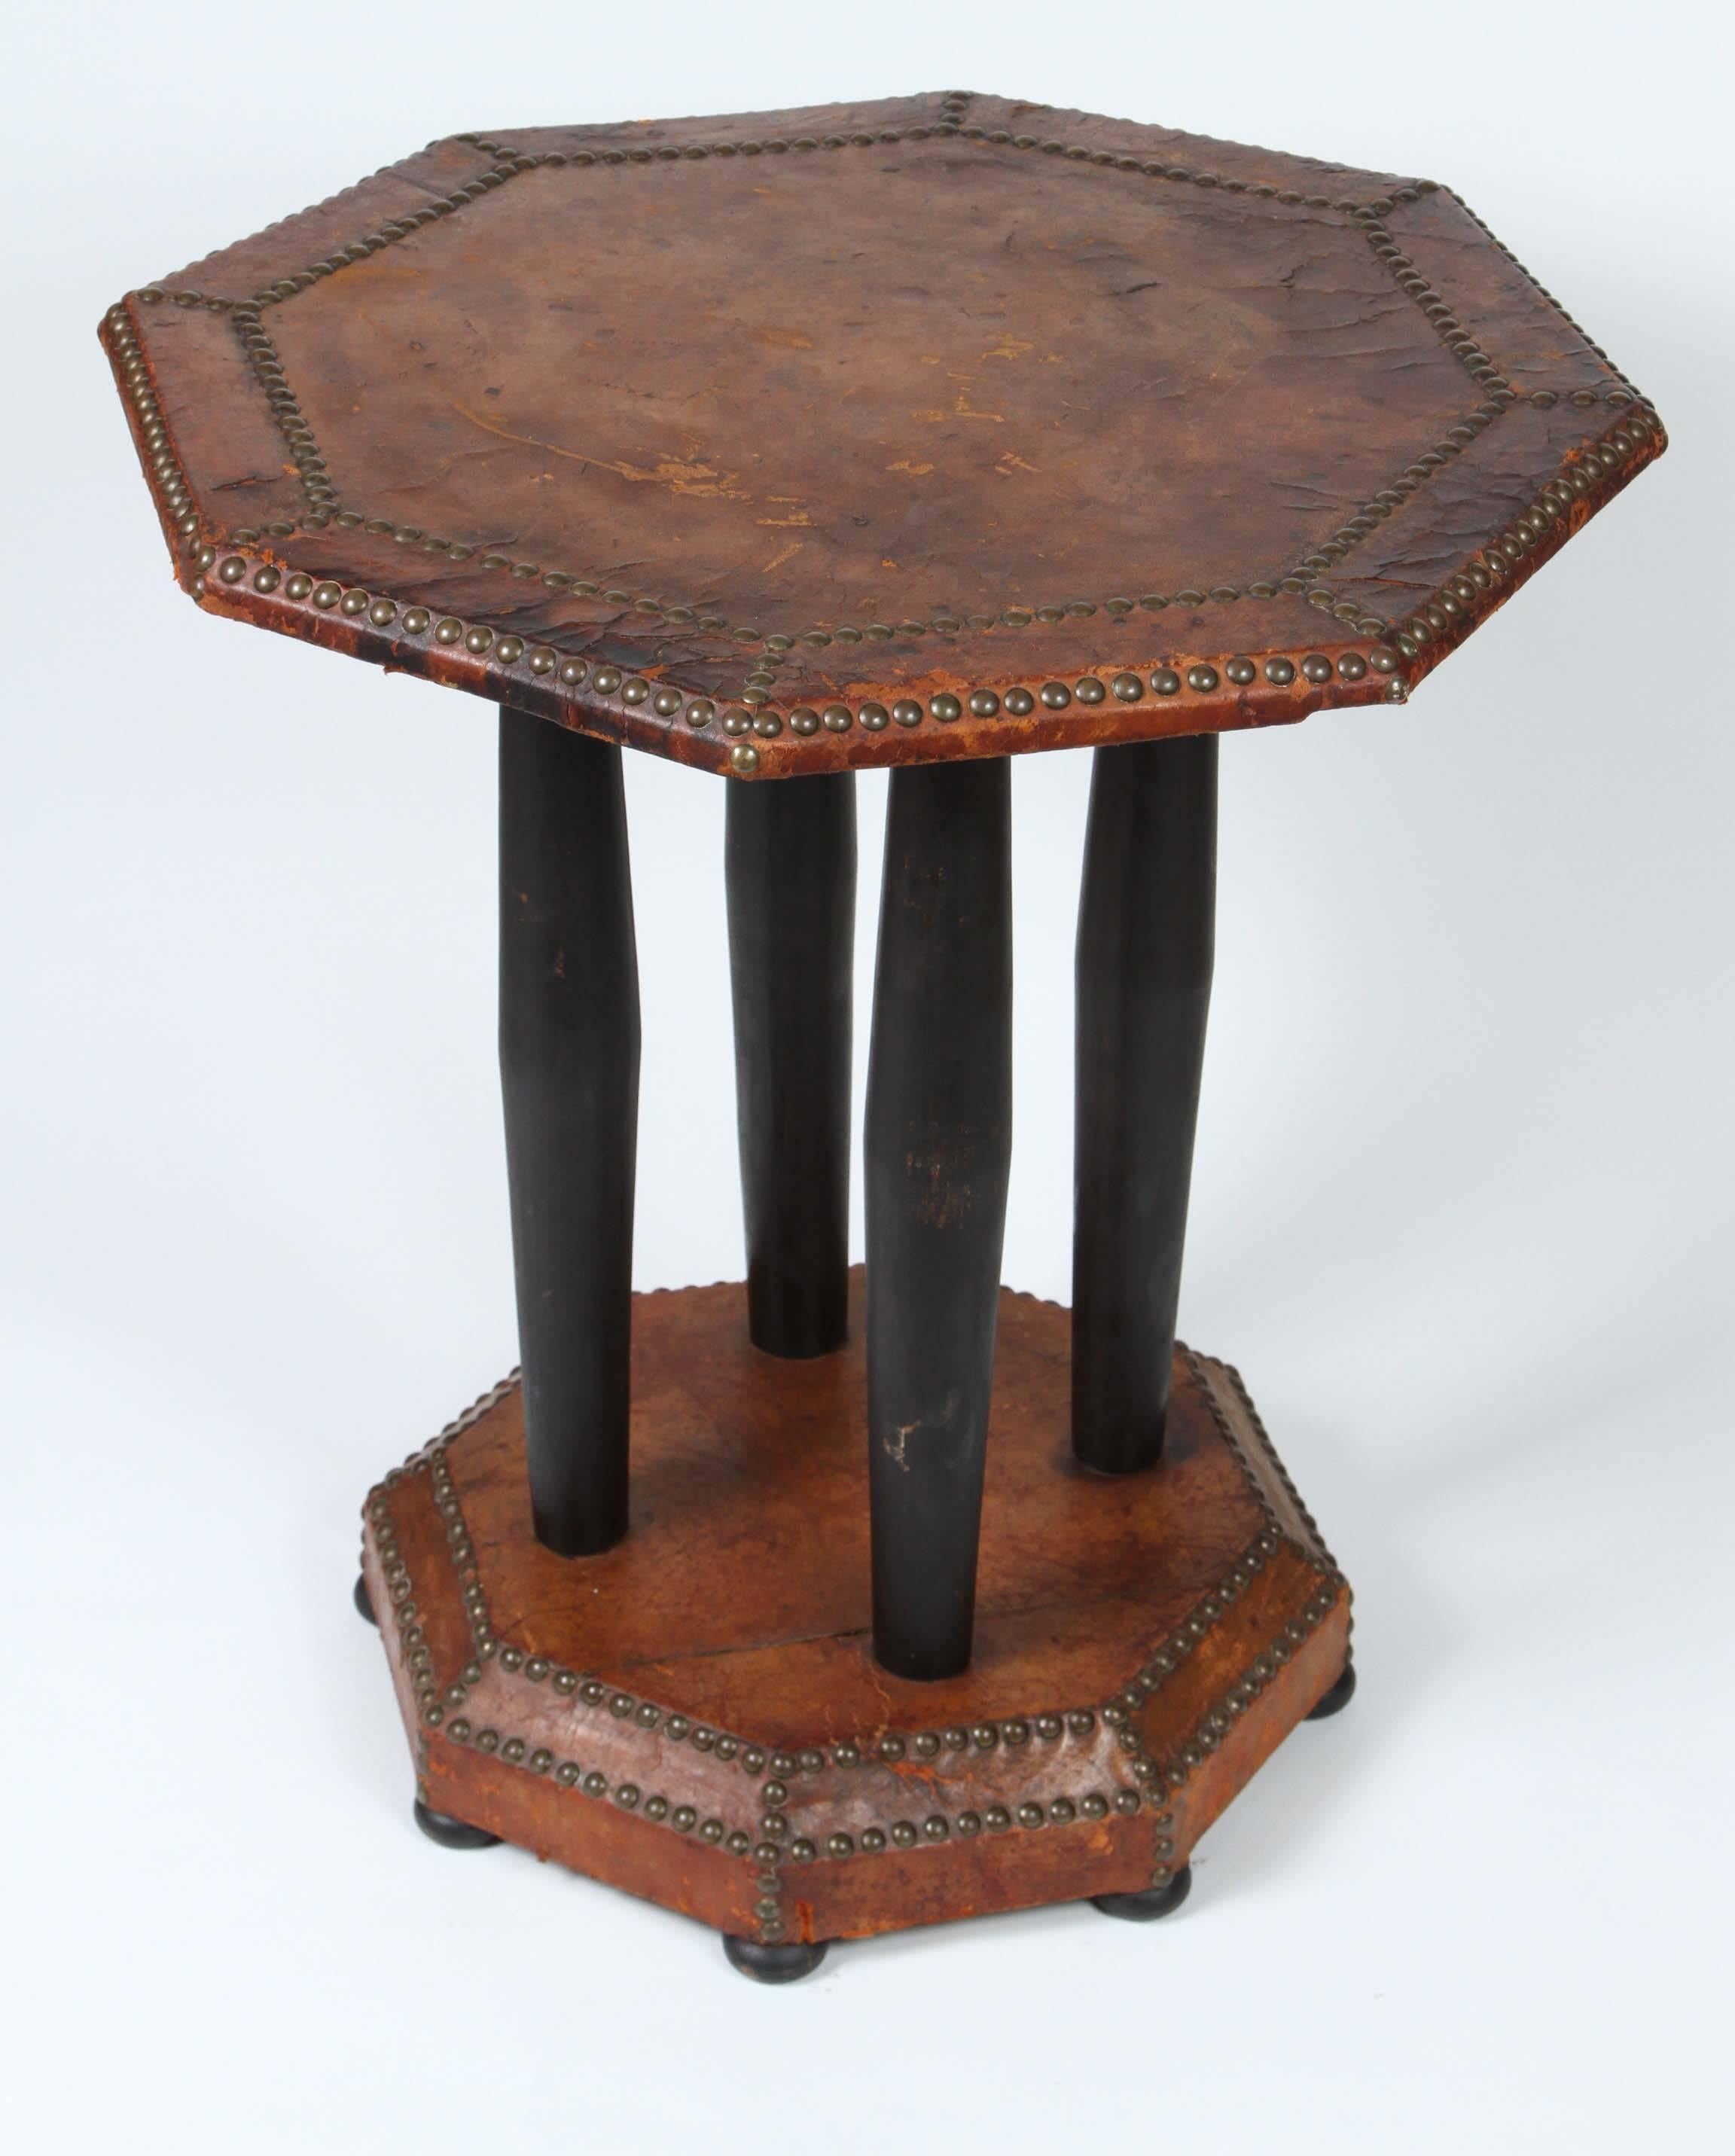 French Art Deco distressed leather side bistro table.
Unique shape antique octagonal wood table with leather wrapped top with studded detail that sits on four tapered black pedestals that connect to a smaller octagonal base also covered in a studded